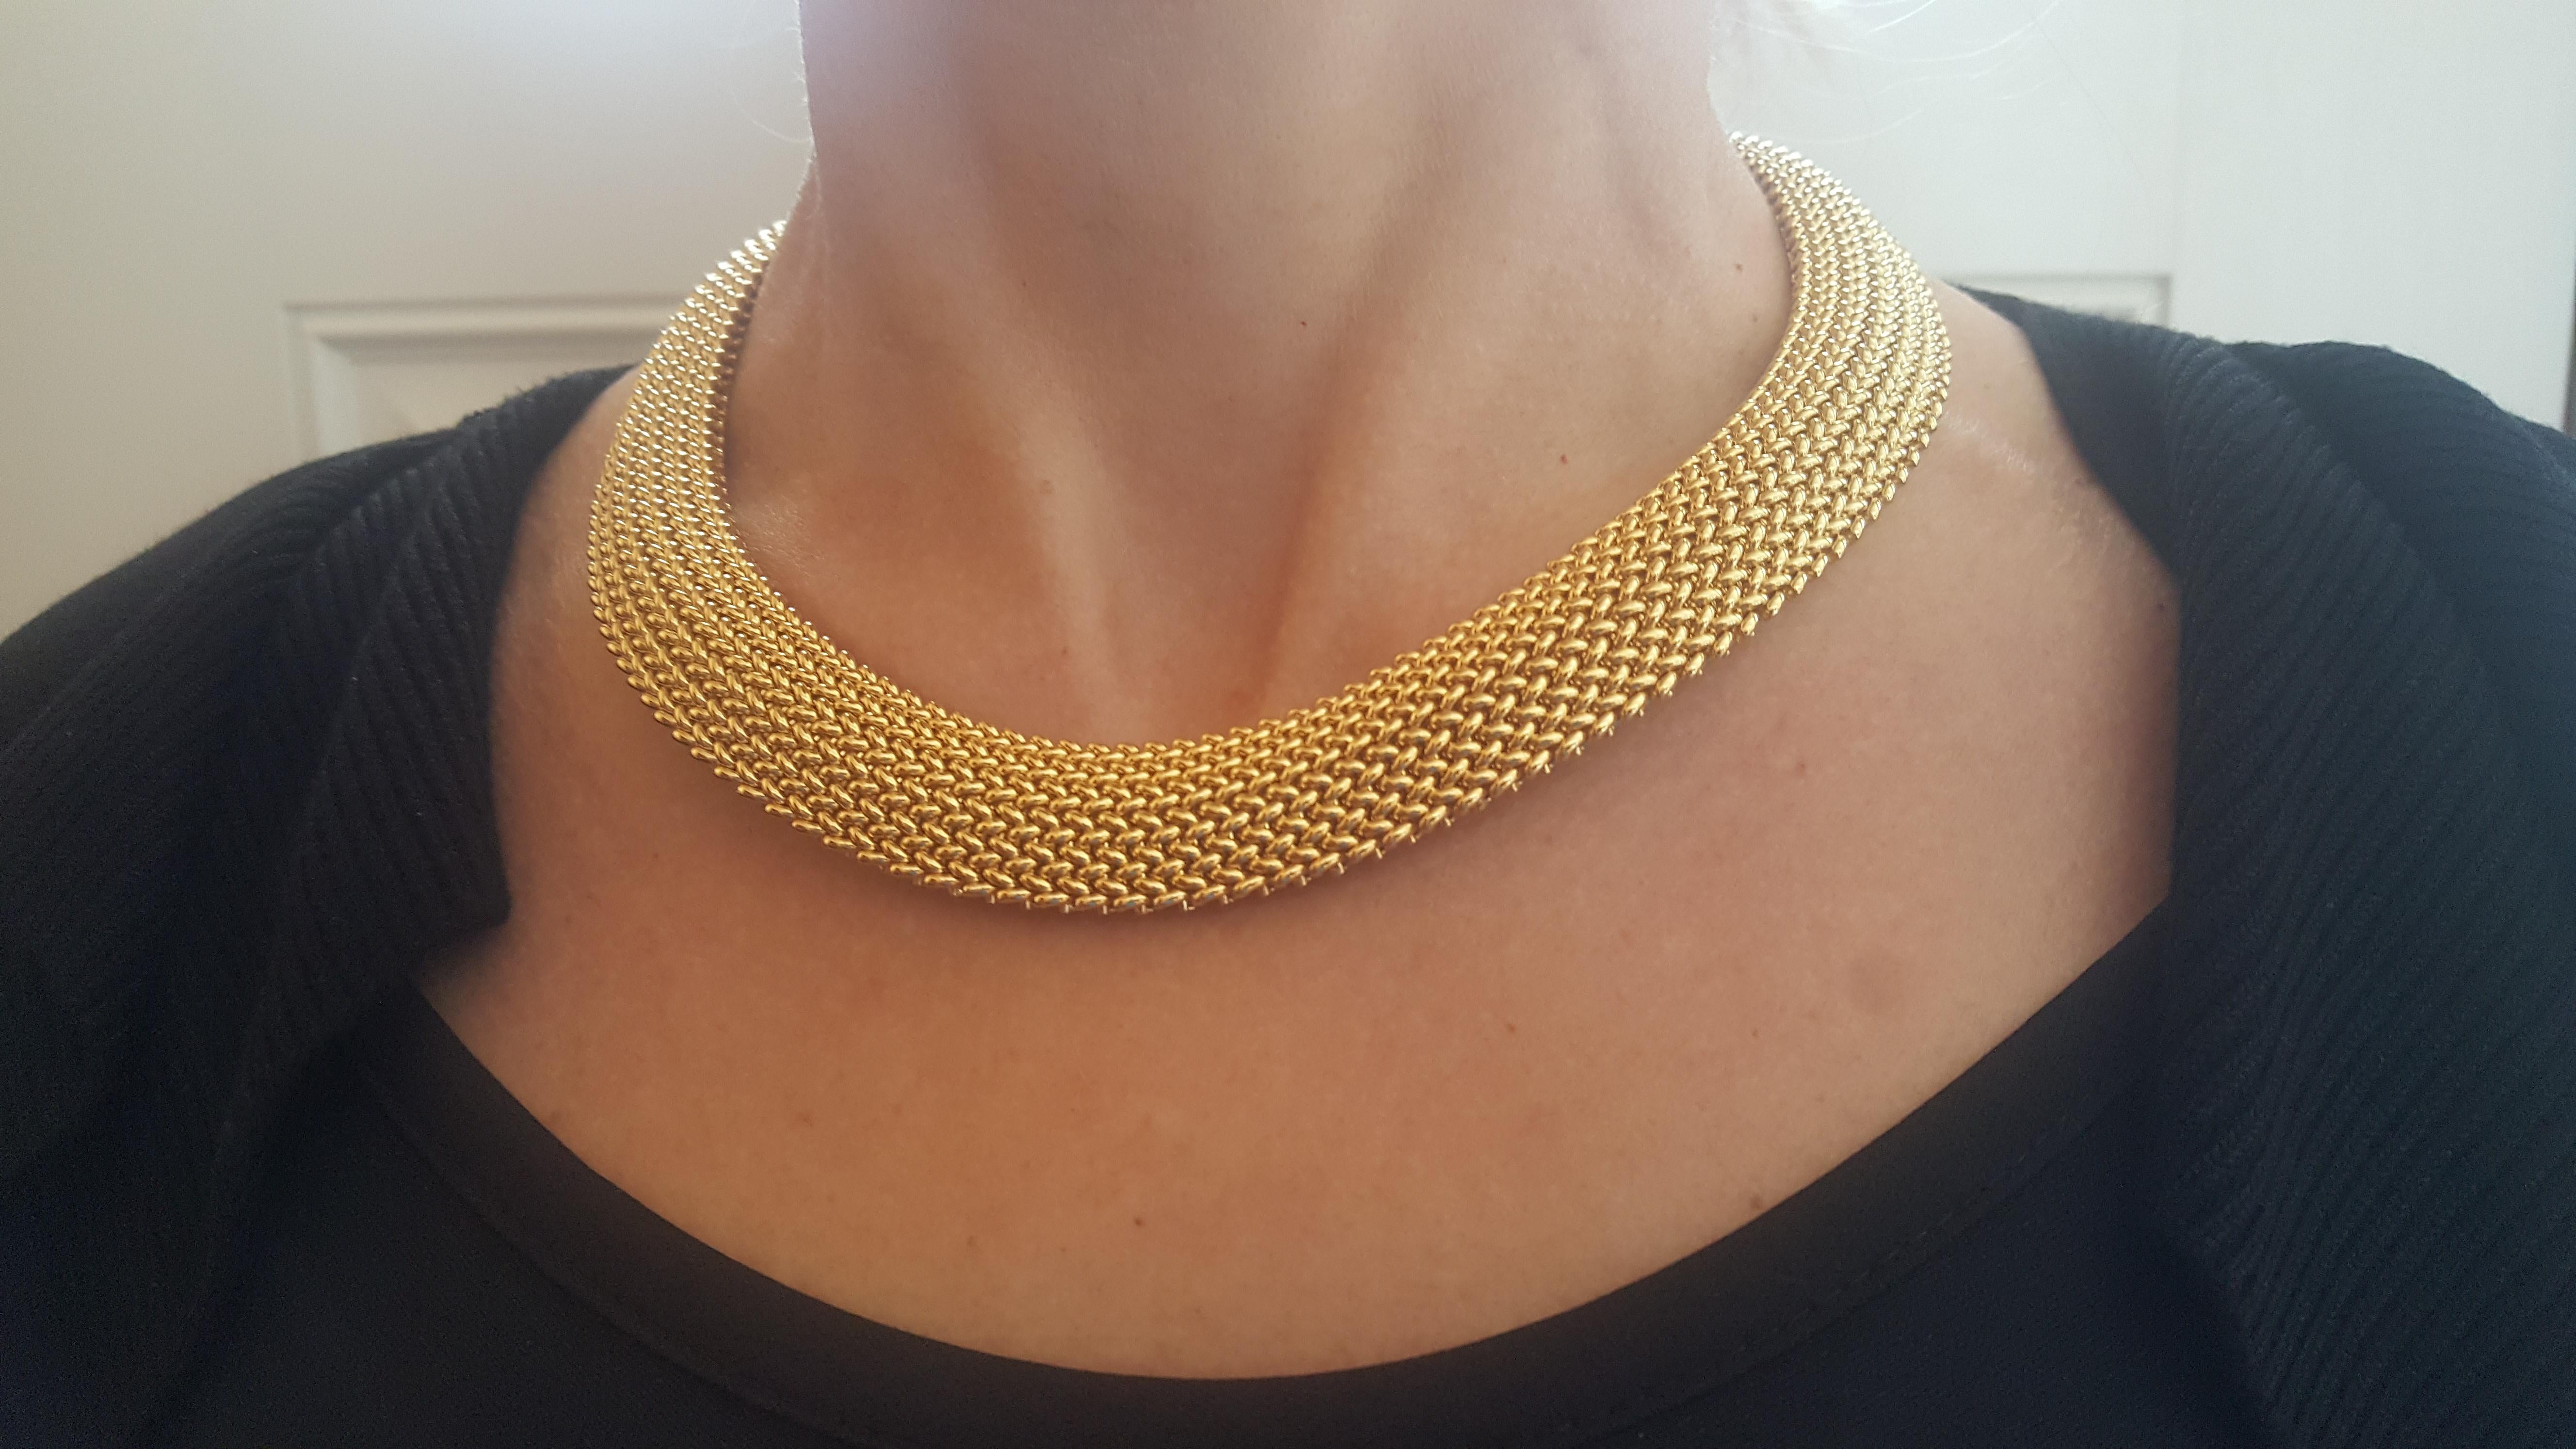 14kt yellow gold omega style necklace with a mesh design 18 inches in length and 18.8mm wide. This necklace is 108.73 grams total which is almost 2 ounces of pure gold. Excellent condition and hardly worn, secured with a push in clasp and a safely